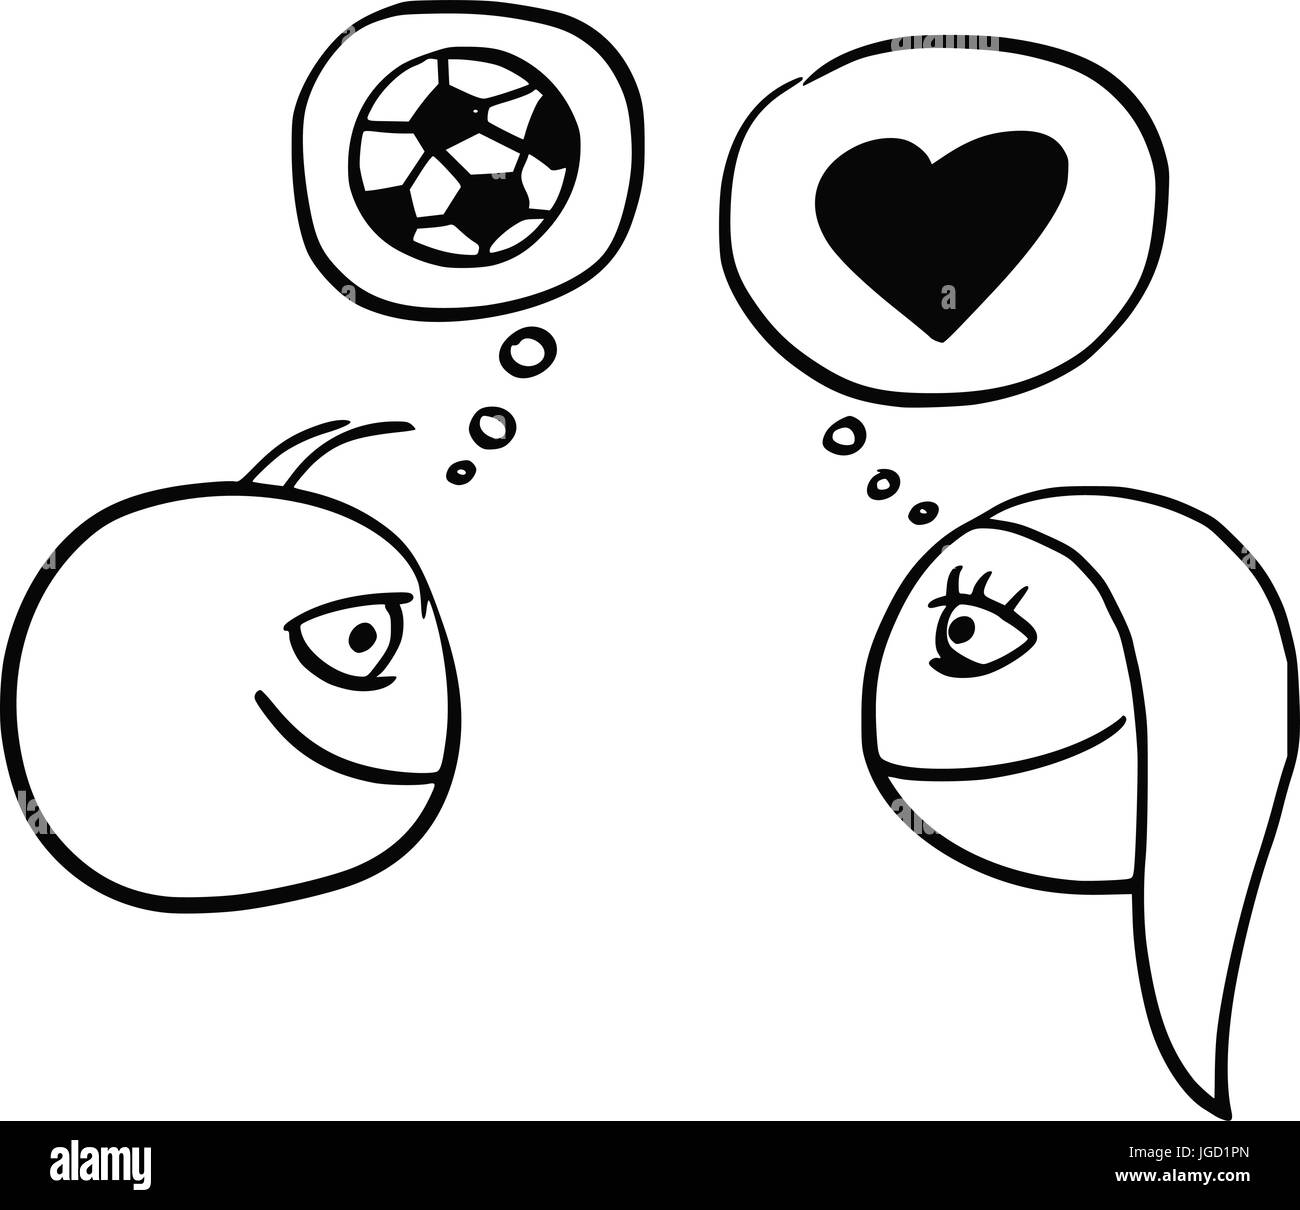 Cartoon vector of difference between man and woman thinking about football soccer ball and heart symbol of love and relationship Stock Vector